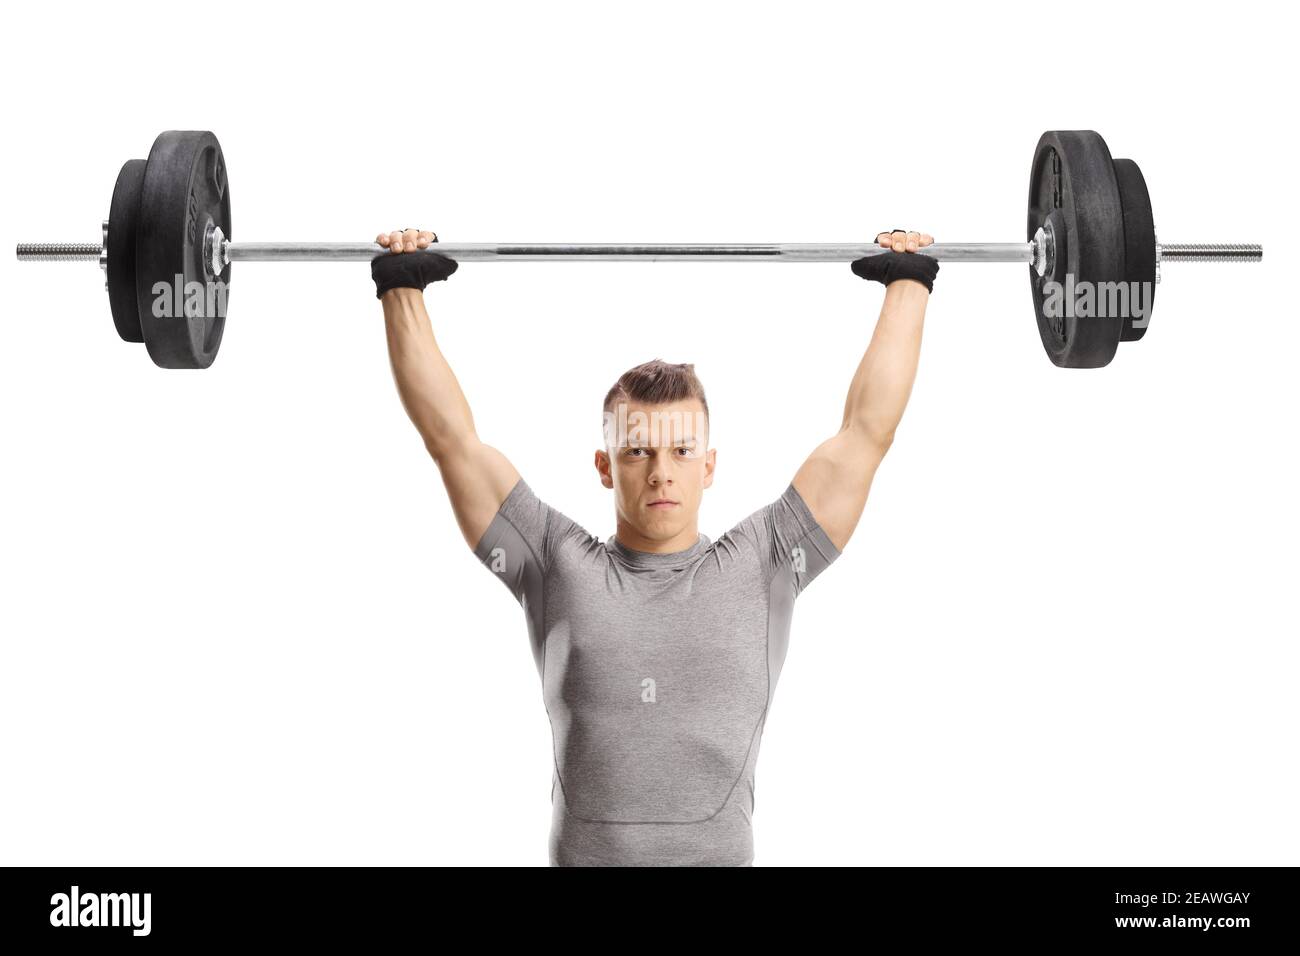 Muscular guy lifting weights isolated on white background Stock Photo